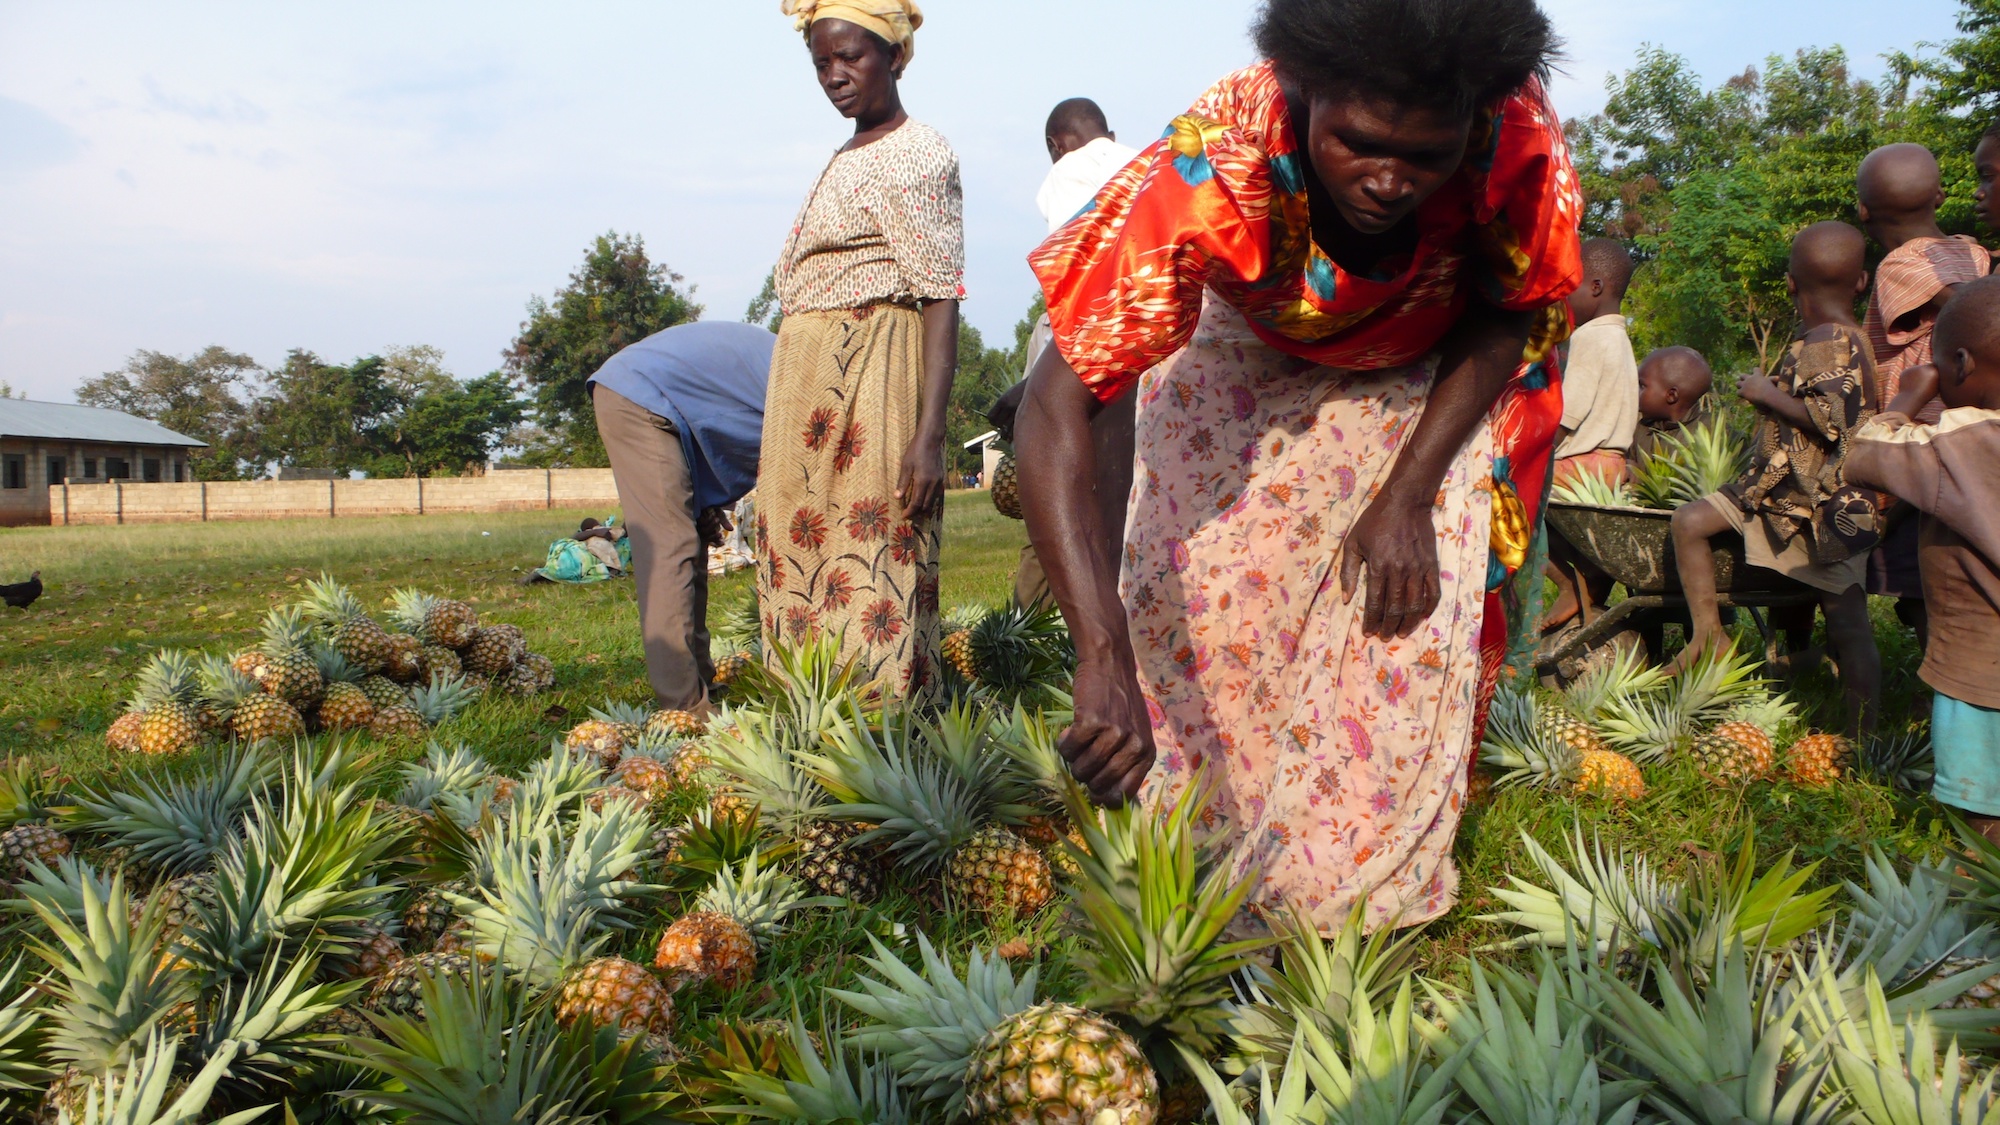 People standing amid piles of pineapples